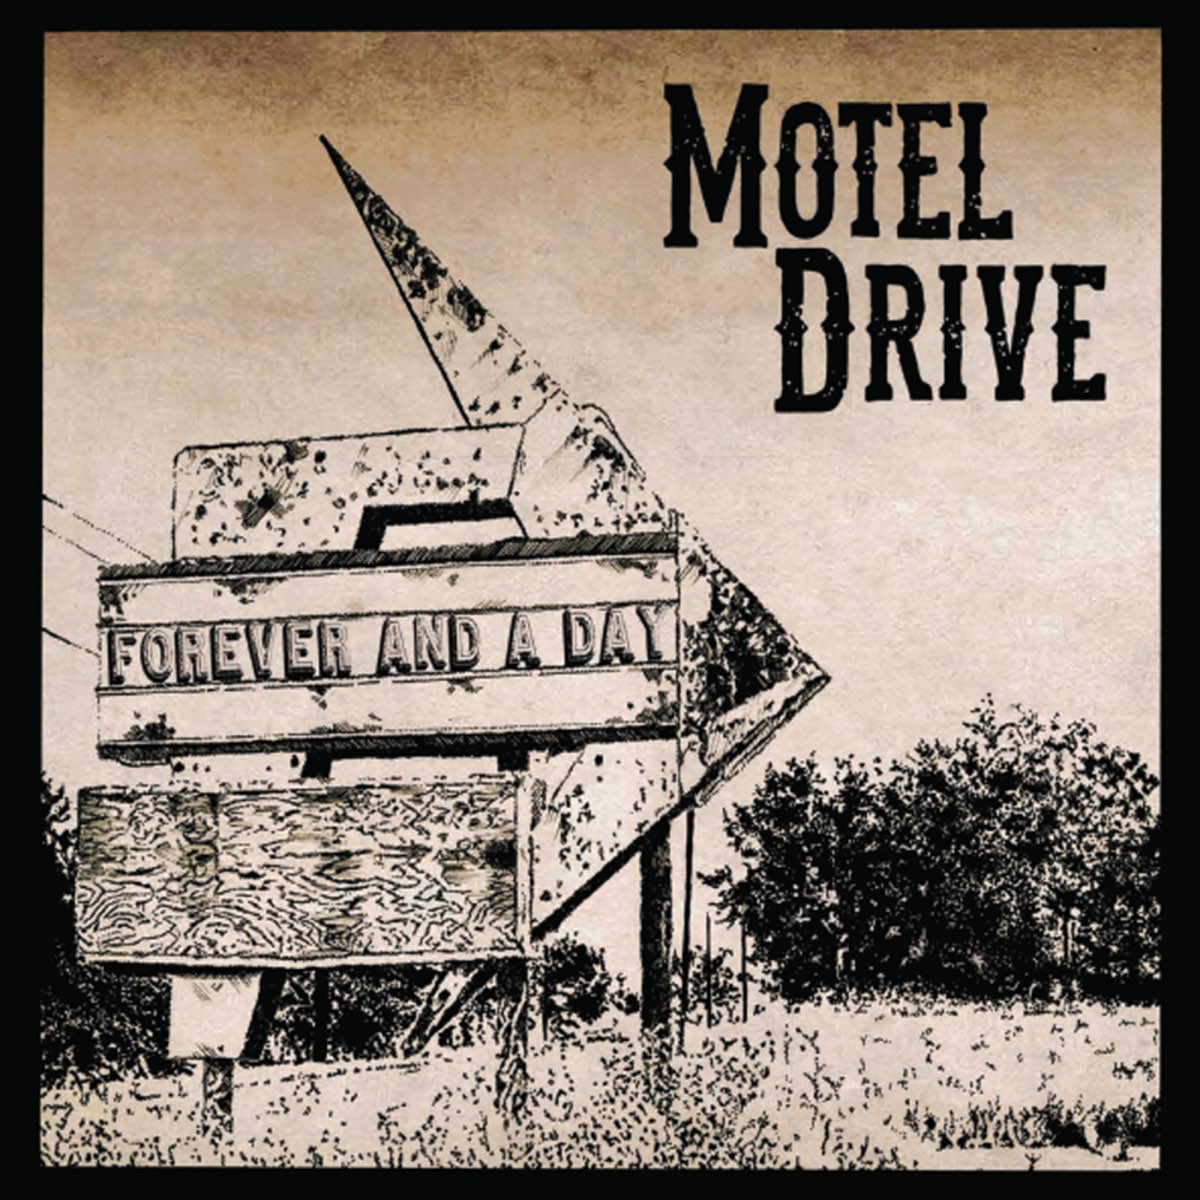 Motel Drive. Saint Motel обложки альбомов. Forever and a Day. Something in the way.